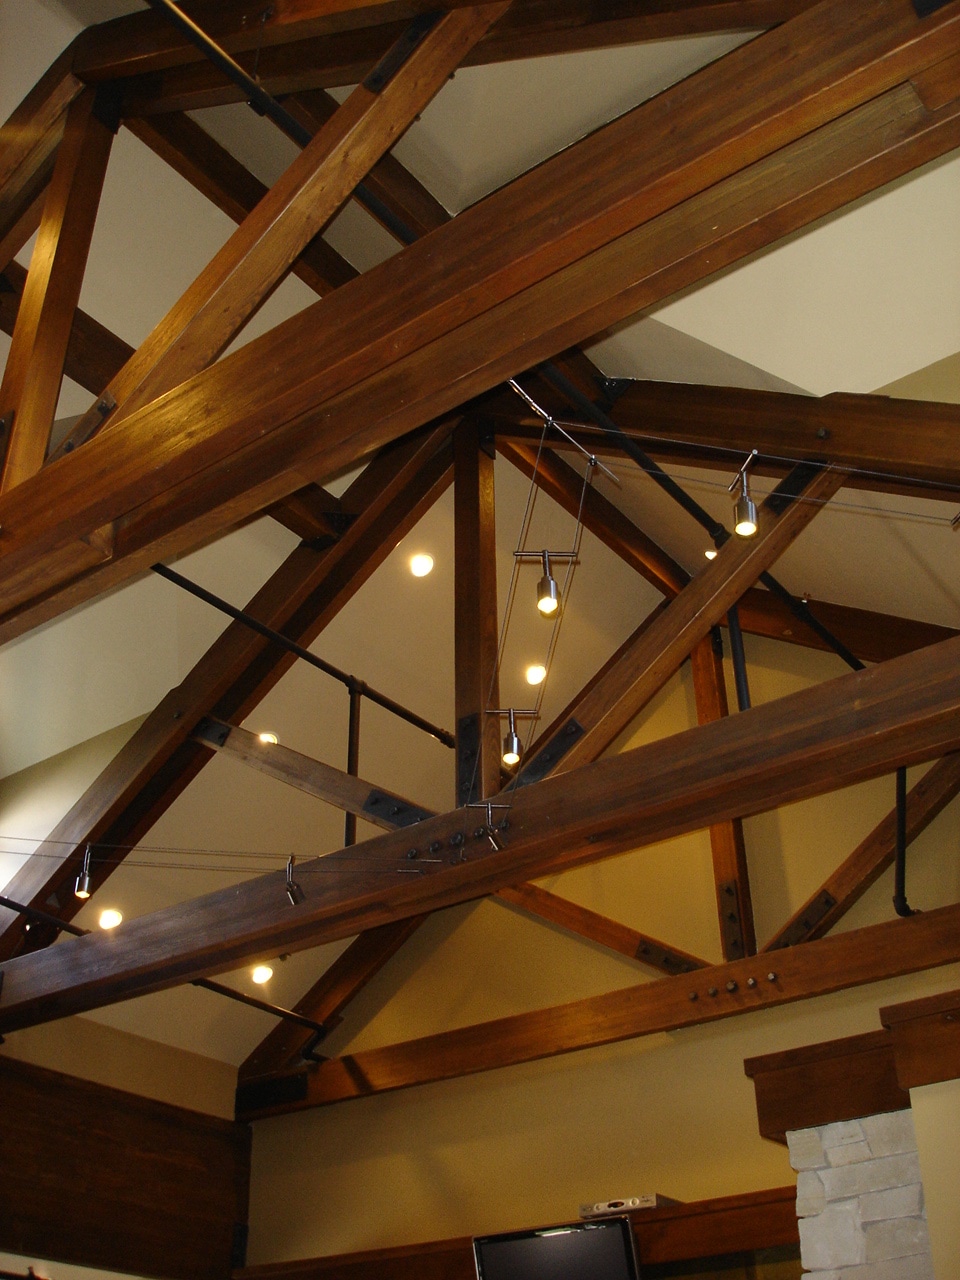 Glued laminated timber Beams and Trusses manufactured by QB Corporation for Elkhorn Inn